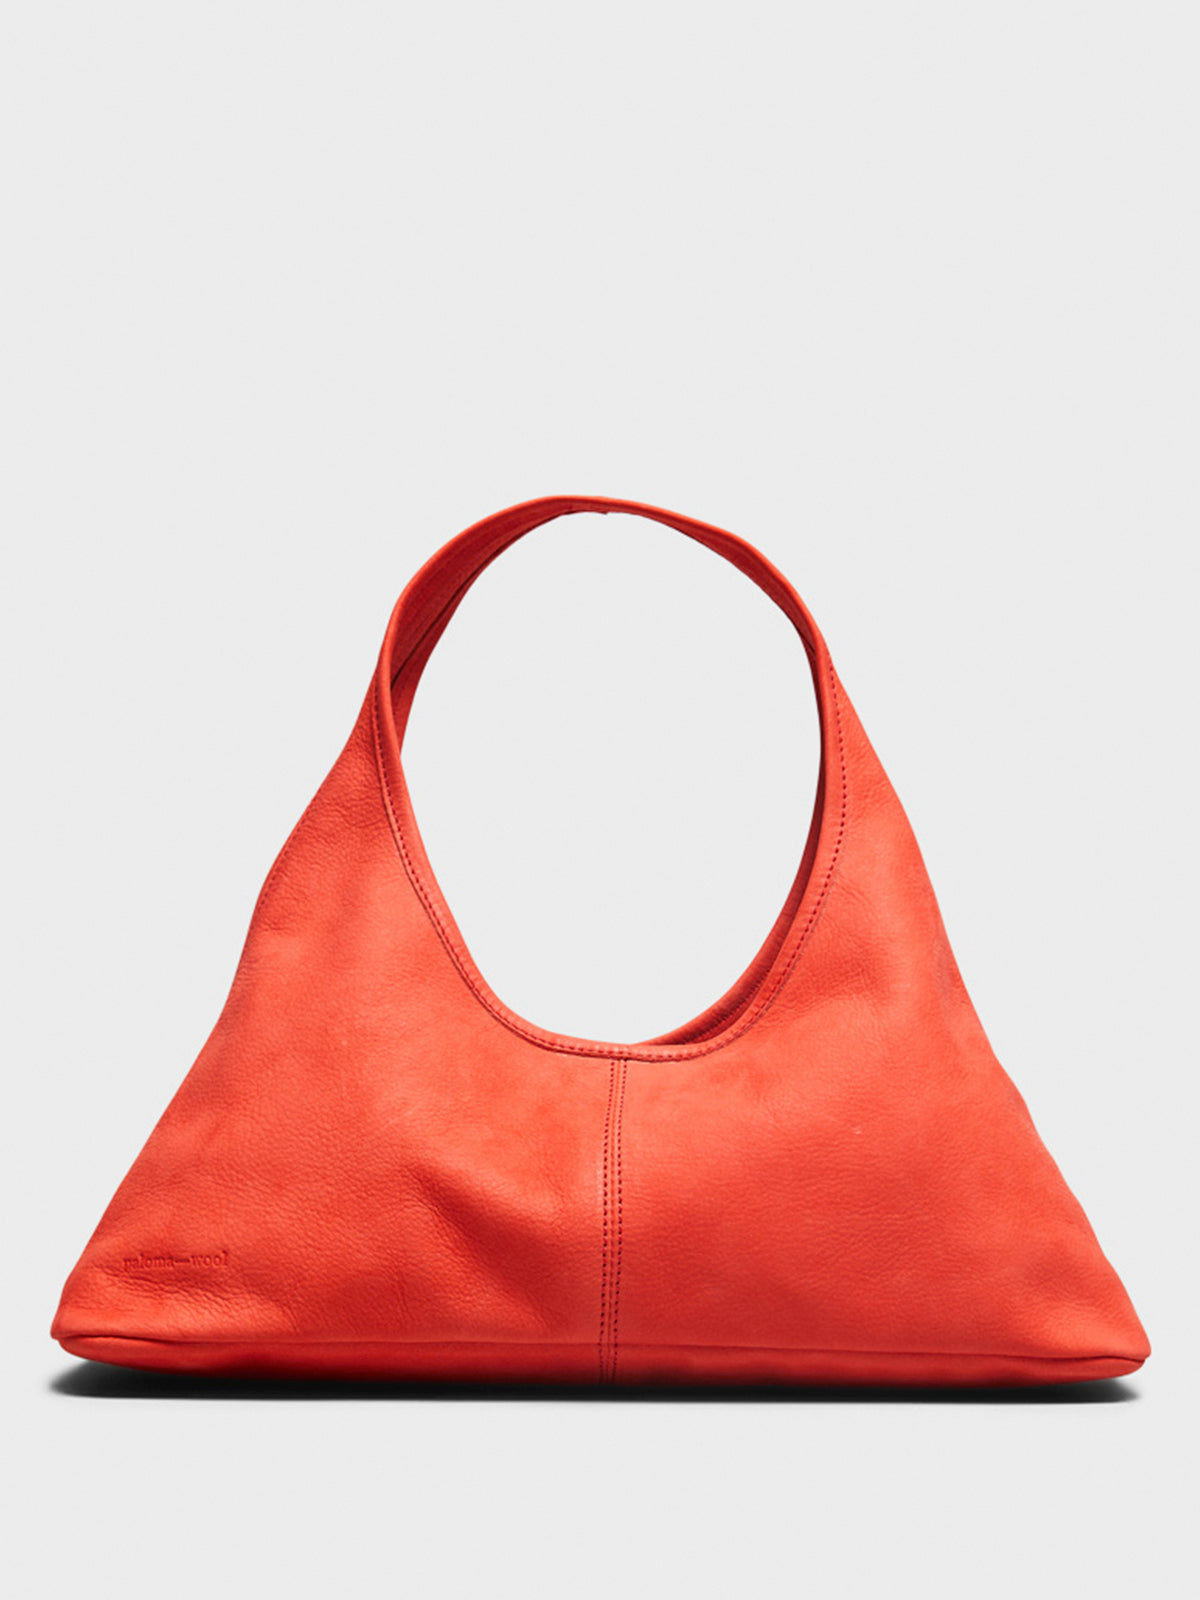 Querida Bag in Red and Orange